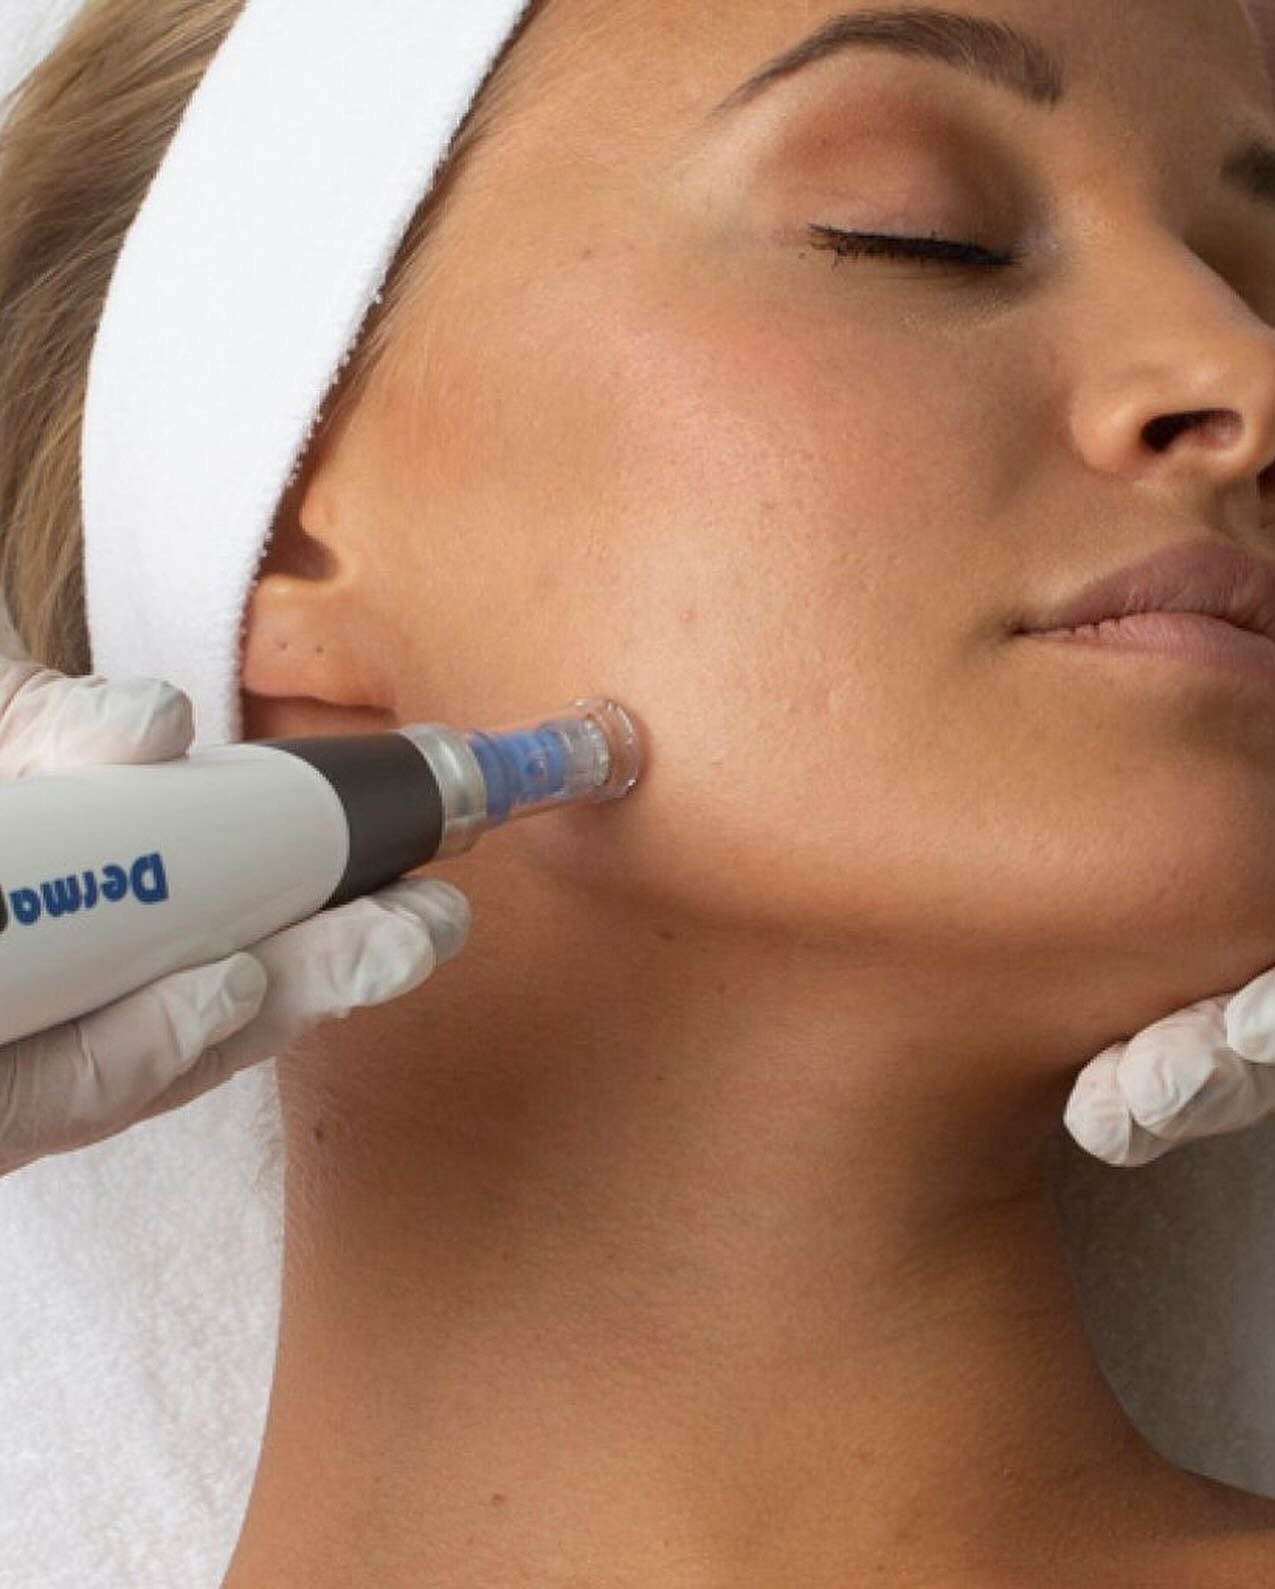 &ldquo;Say goodbye to dull skin! Dermapen microneedling naturally boosts collagen, delivers healing nutrients, and gives you plumper, younger-looking skin. 

A full consultation is provided to ensure this is right for you. 

Our most popular treatmen